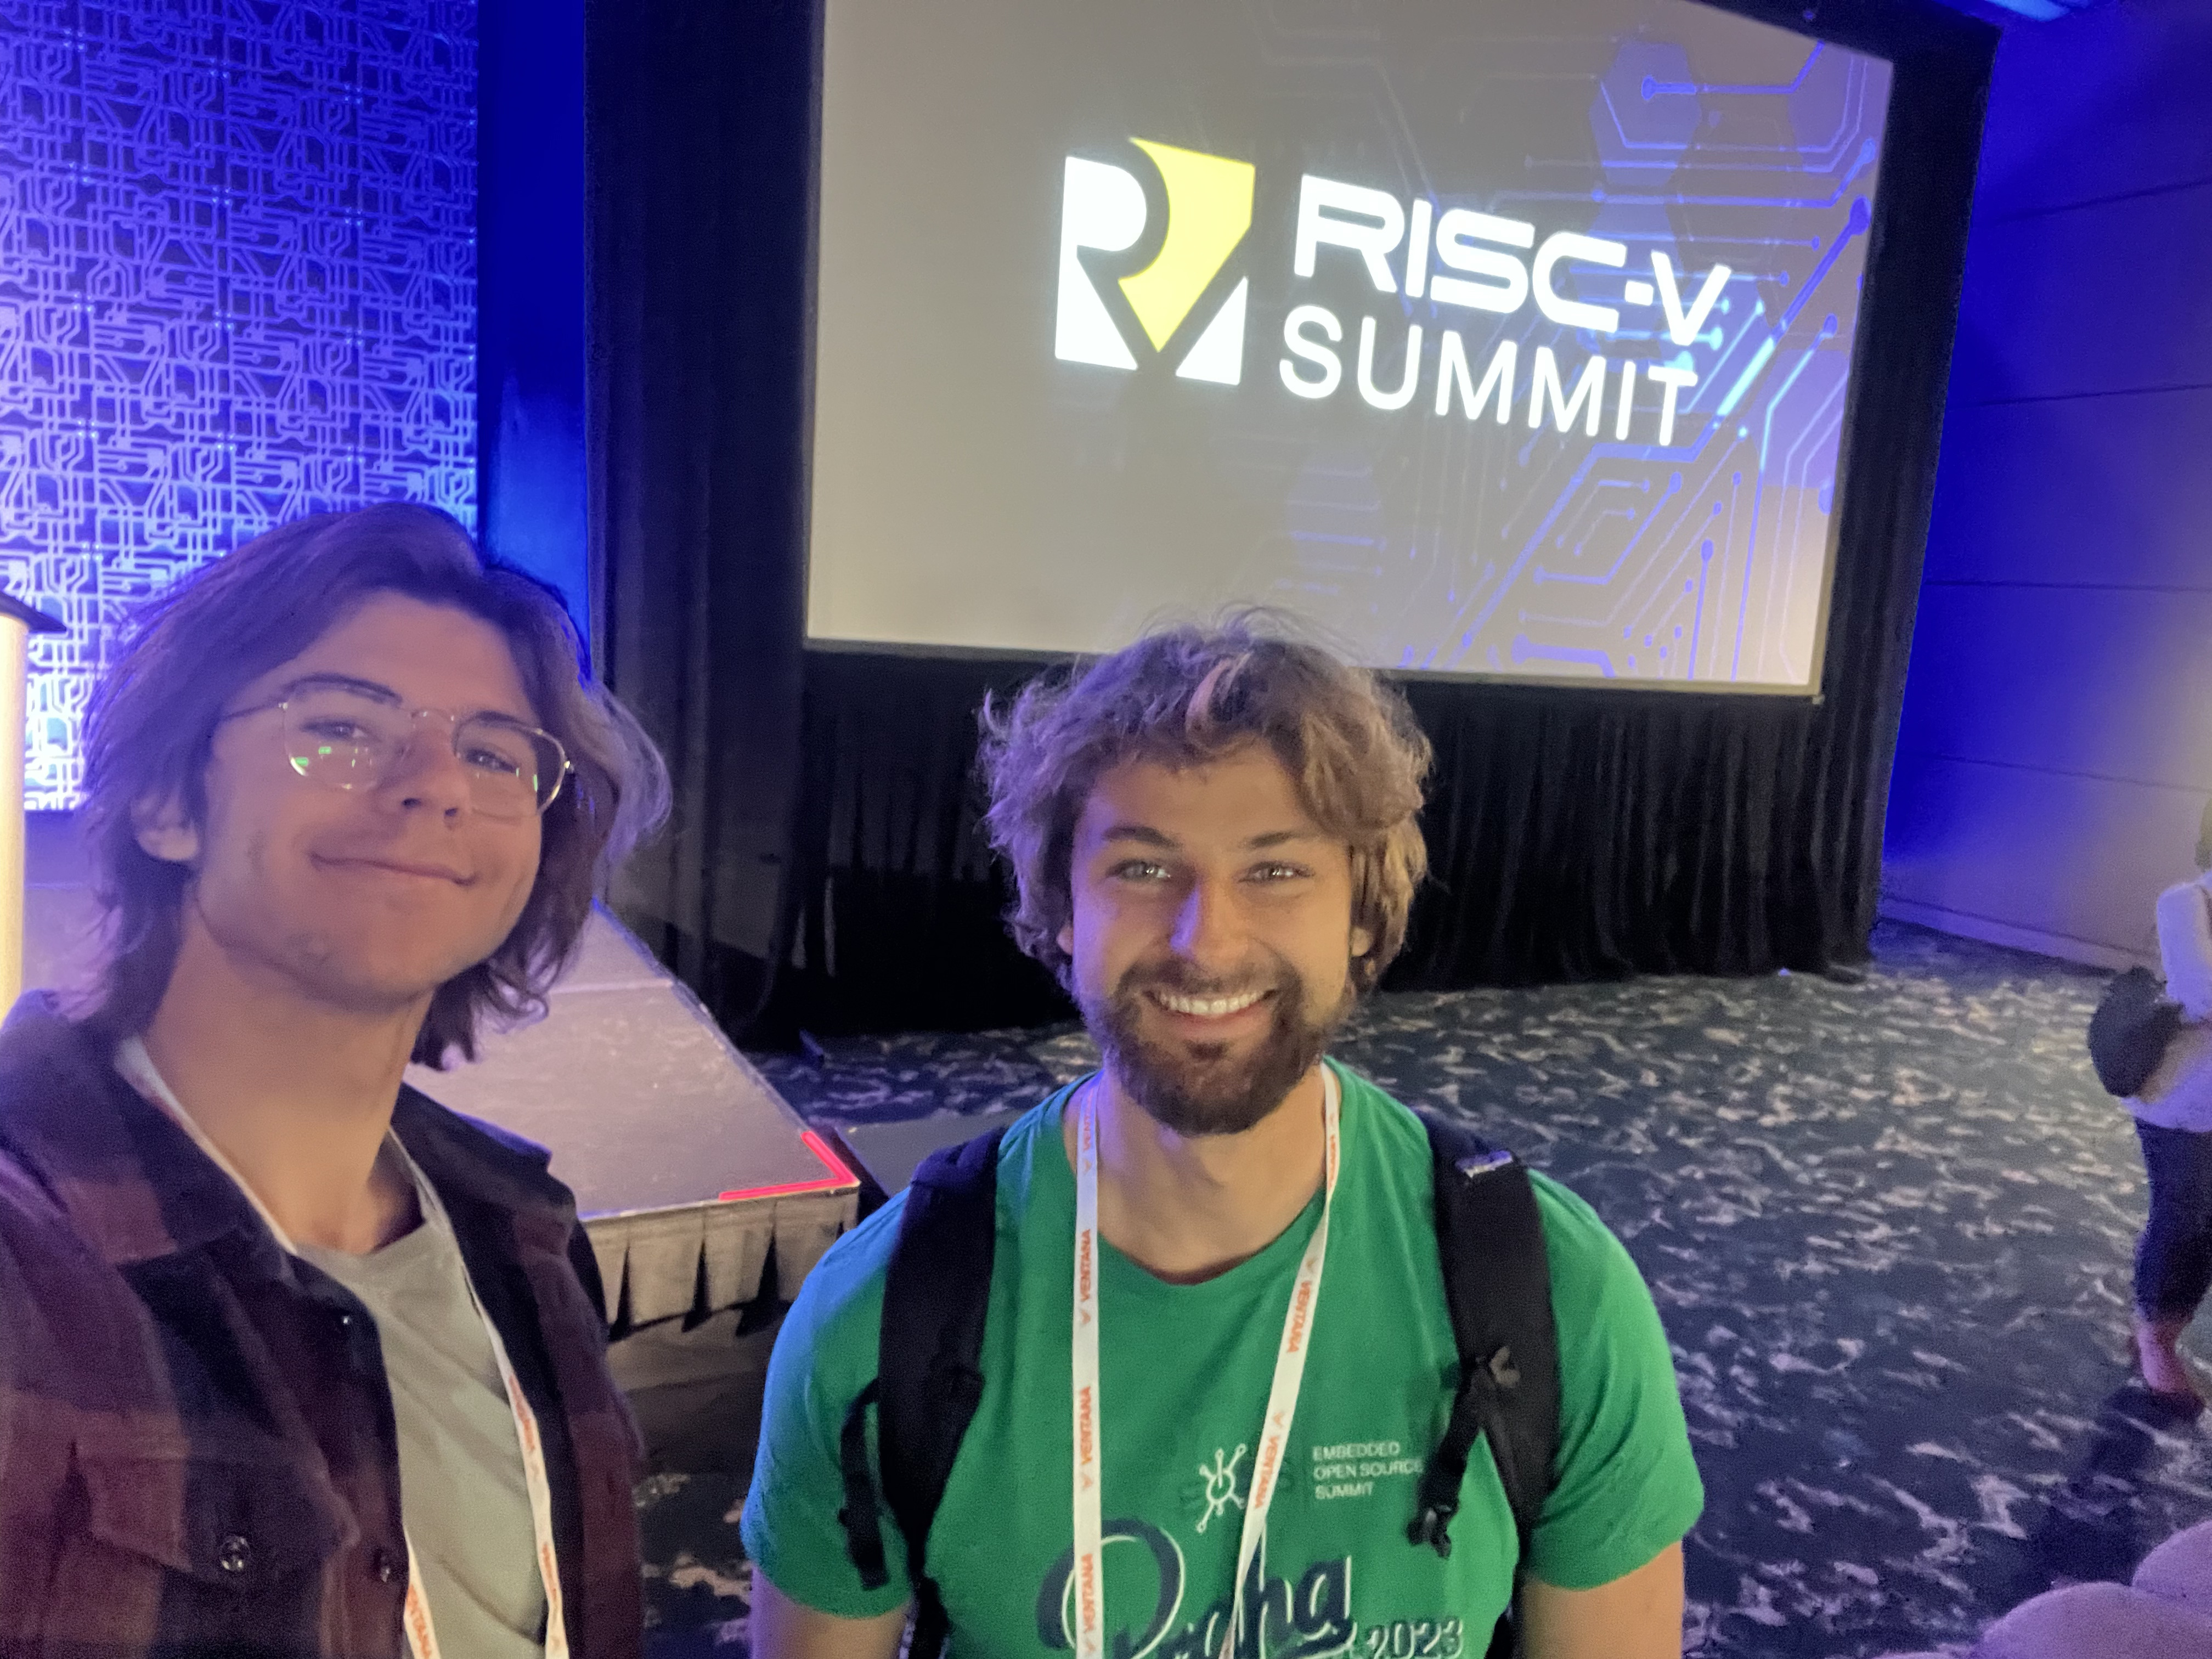 Me and Szymon at RISC-V Summit